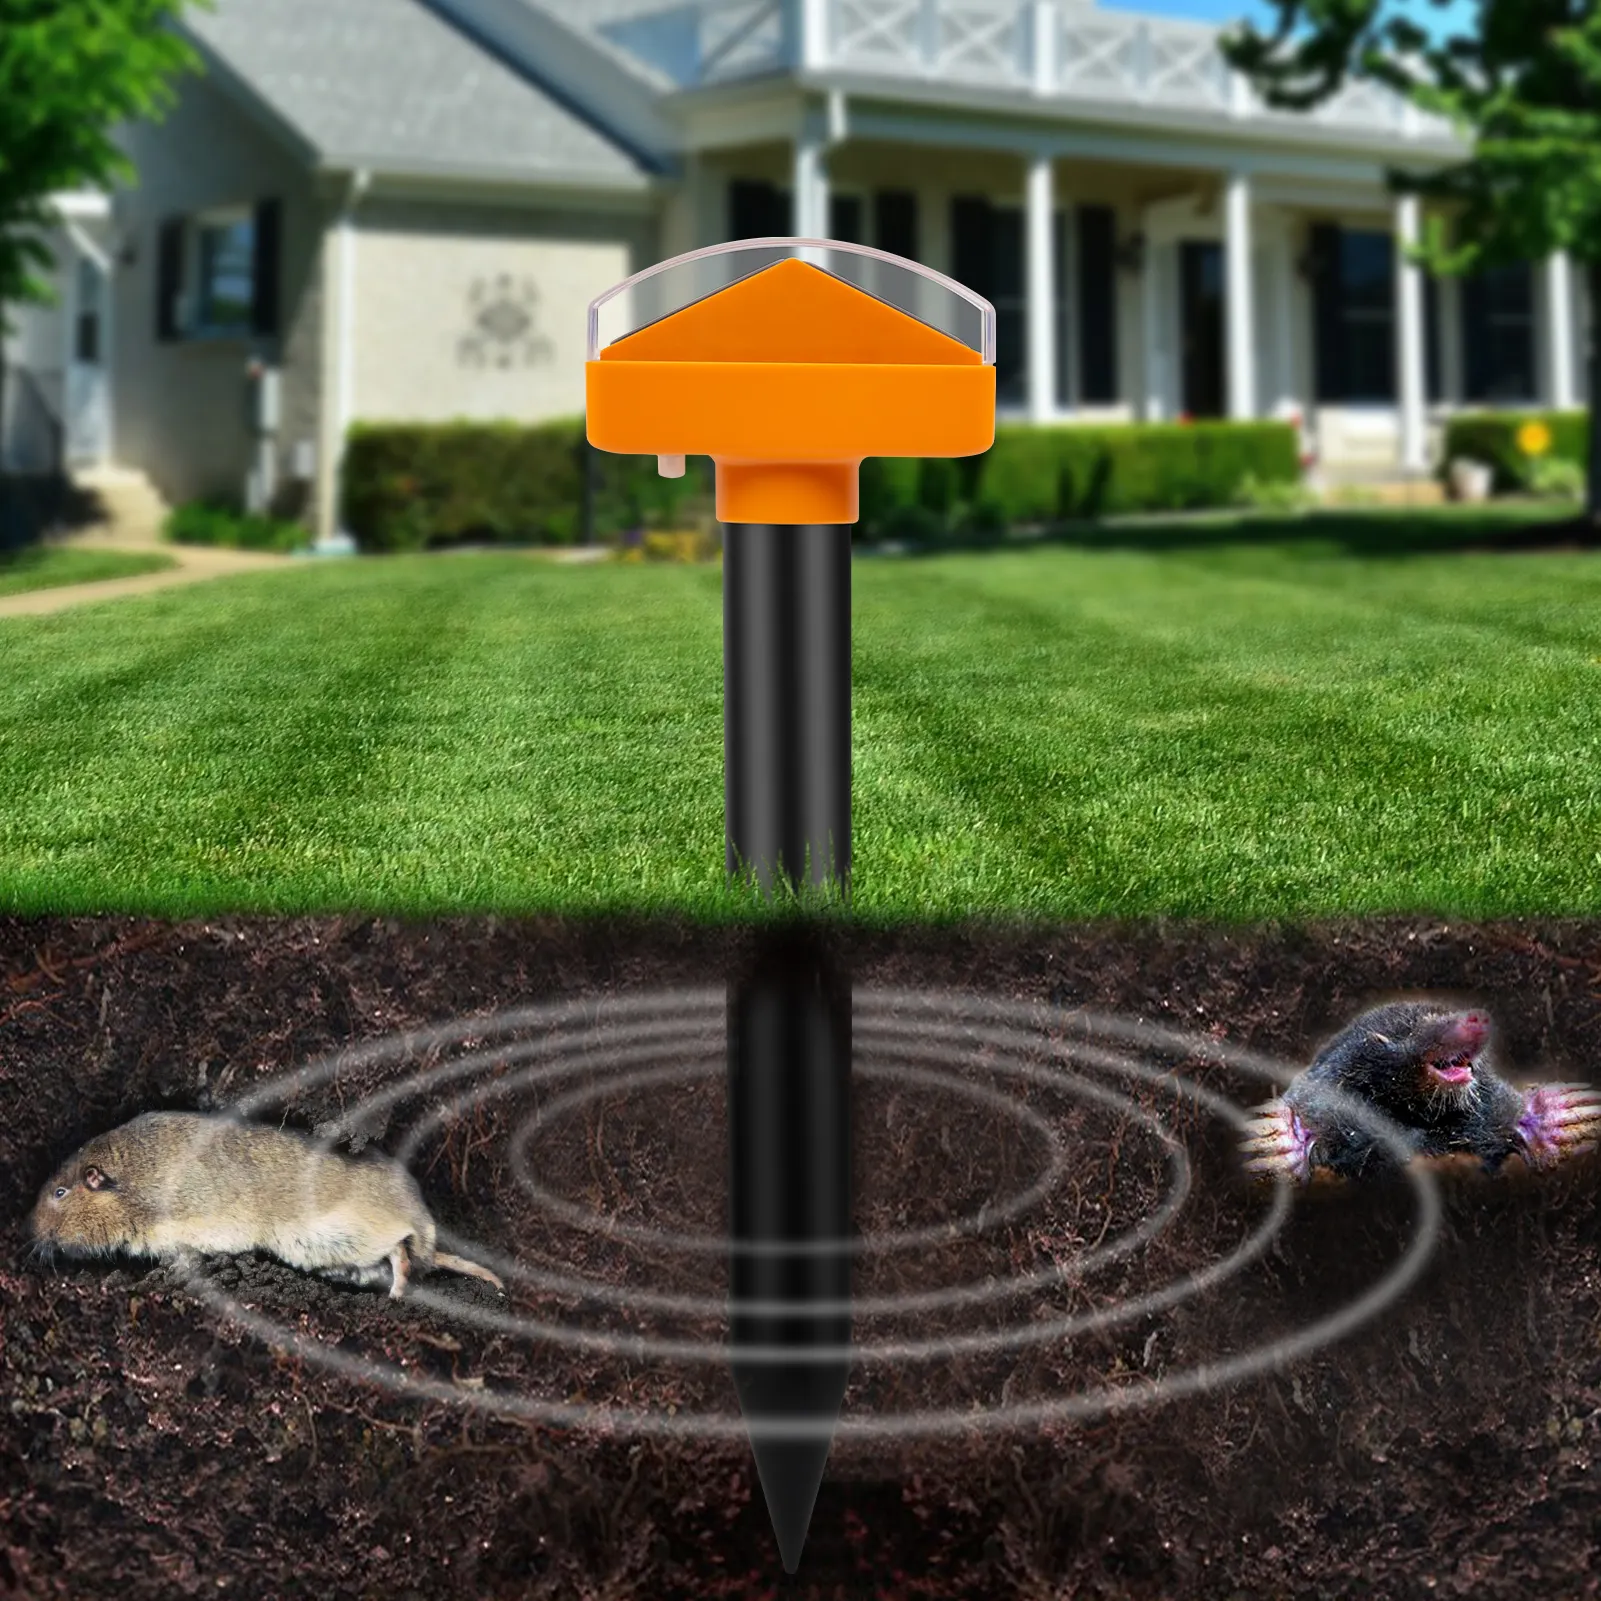 Ultrasonic and Lights Get Rid of Mole Gopher Snake for Yard Lawns Waterproof 2 in 1 Mole Repellent Ultrasonic Gopher Repeller